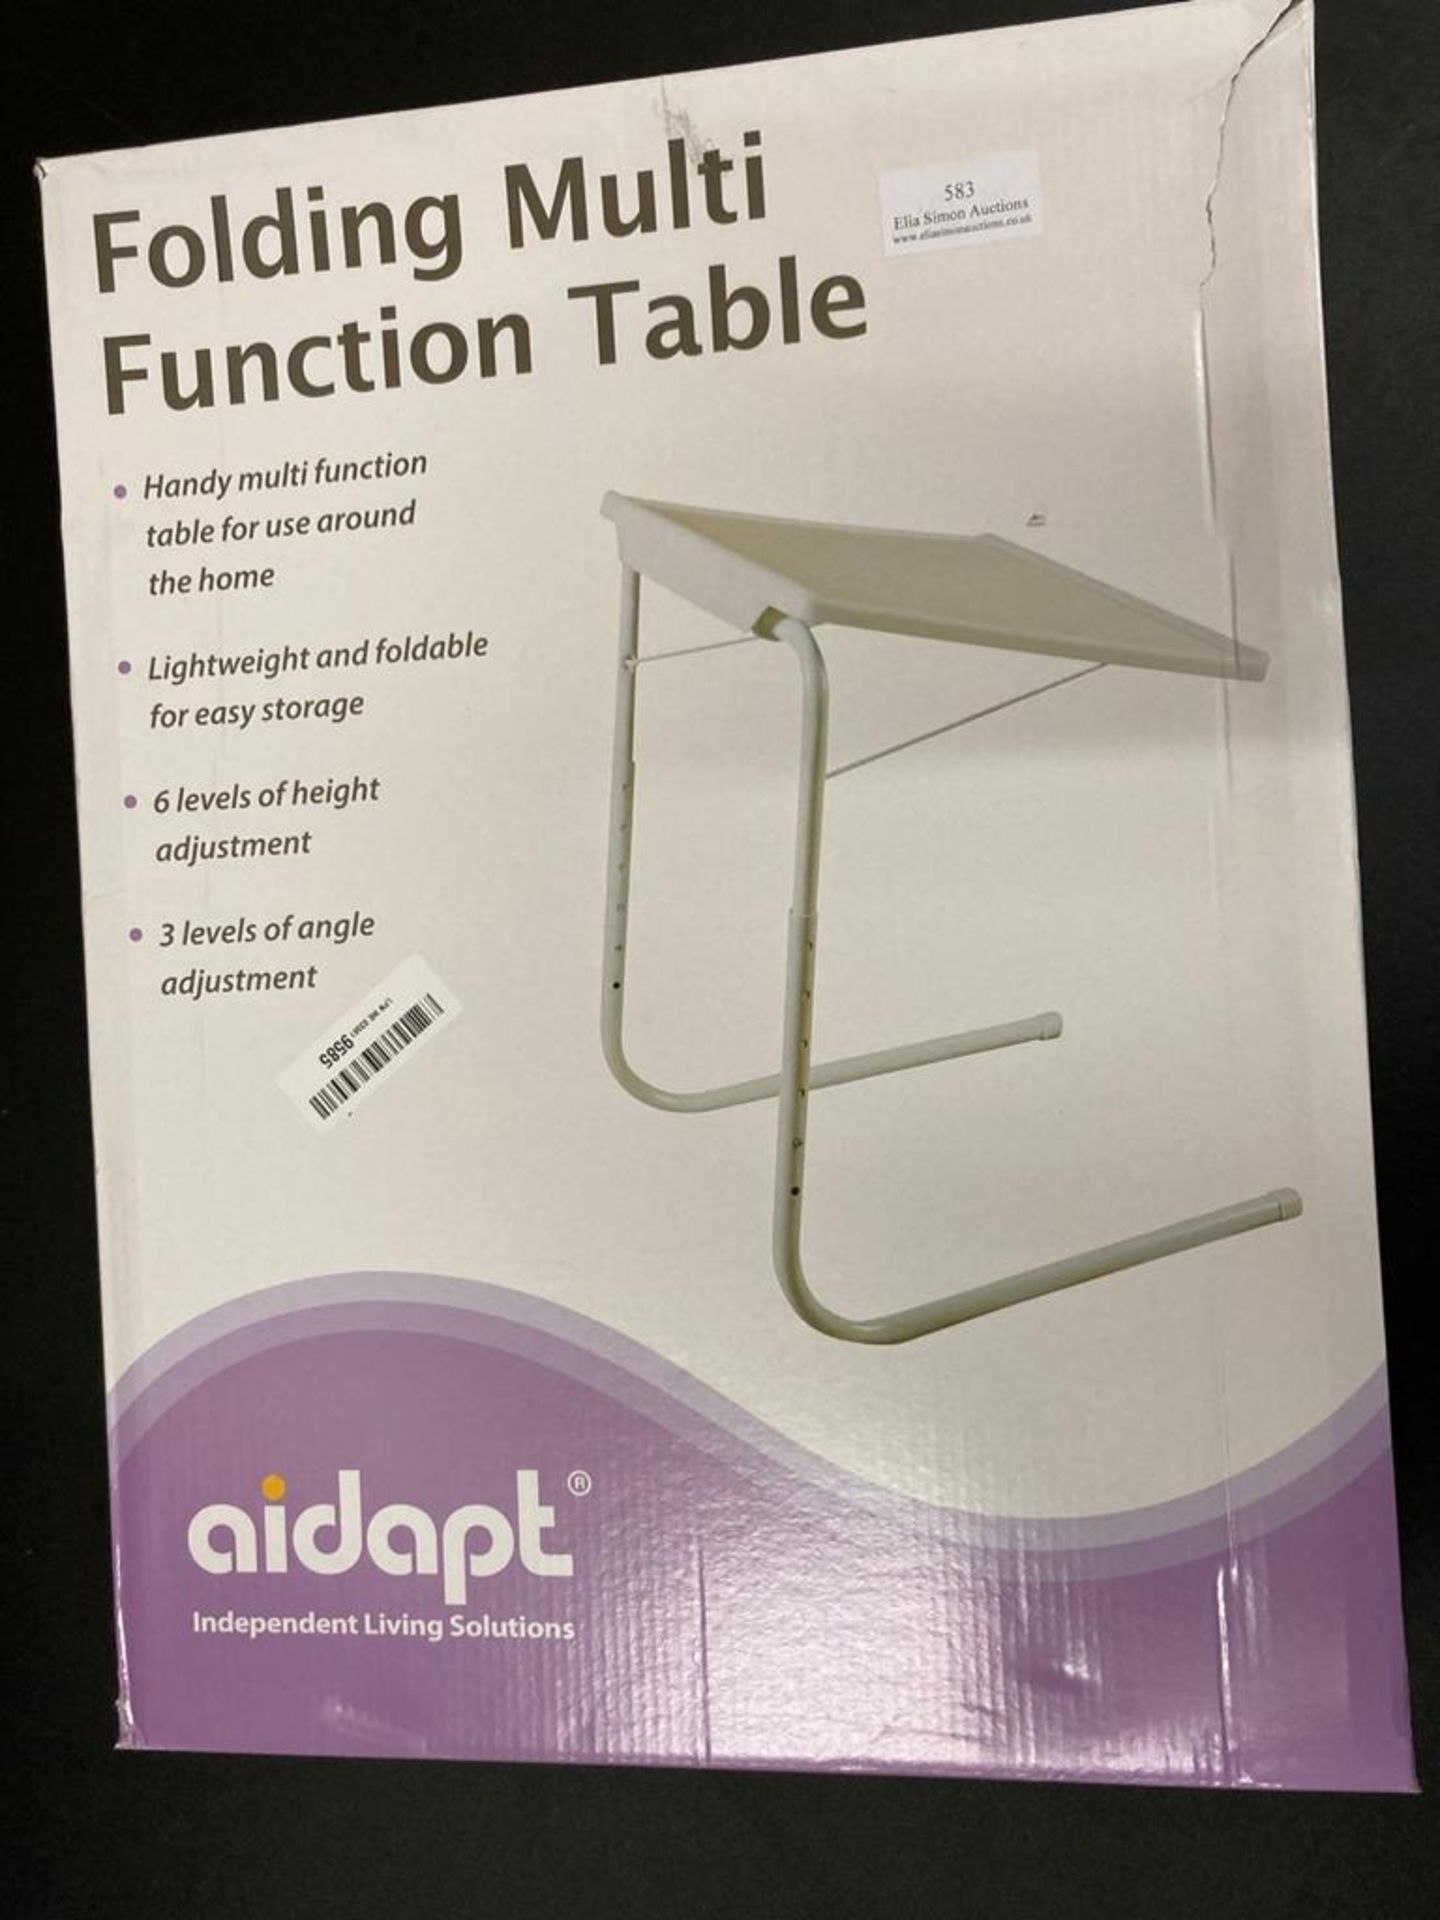 Aidapt Multi Function Table (Eligible for VAT relief in the UK) - Image 2 of 2